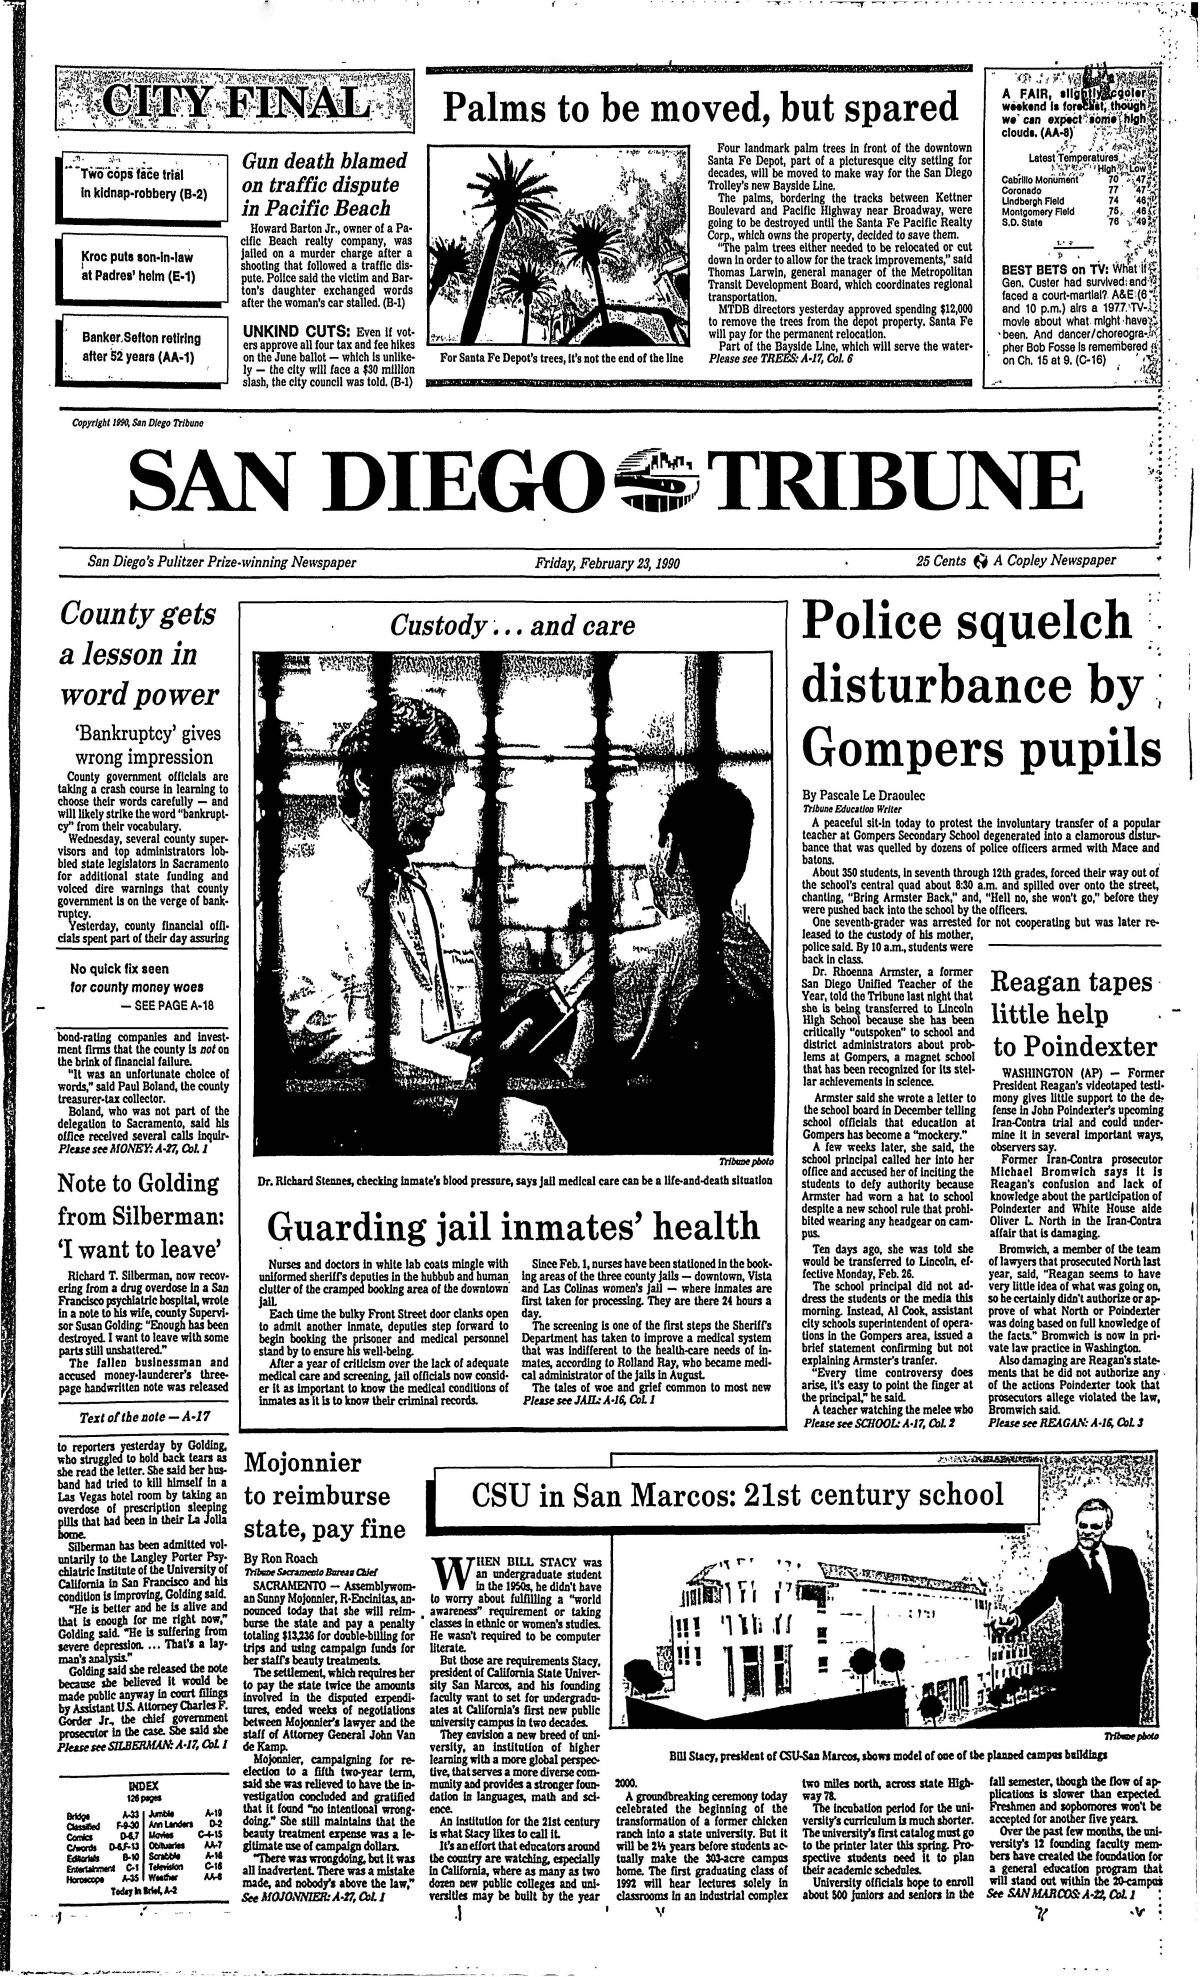 February 23, 1990 front page